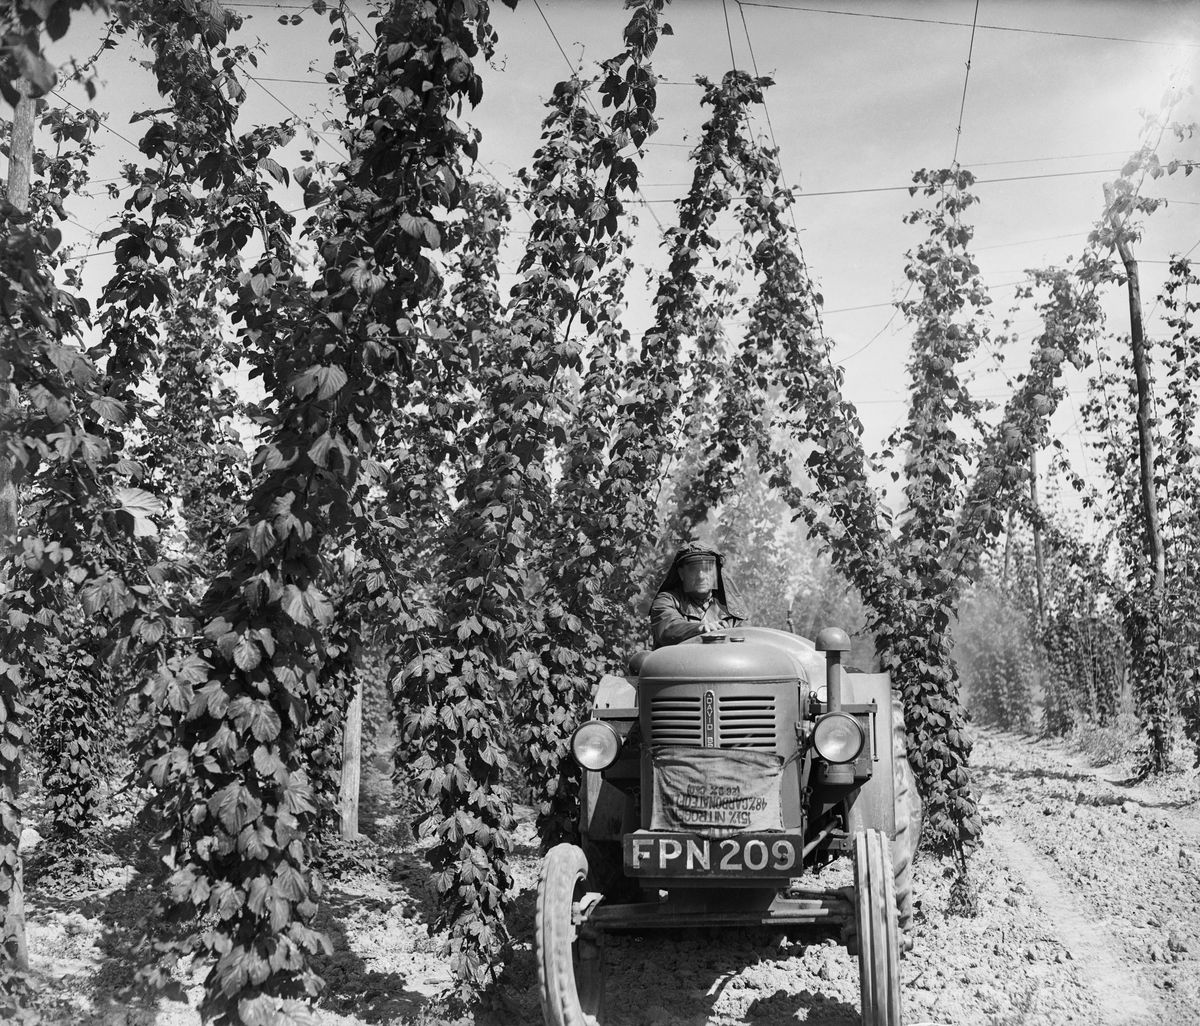 A tractor drives through rows of hops plants, or bines, hanging from strings.